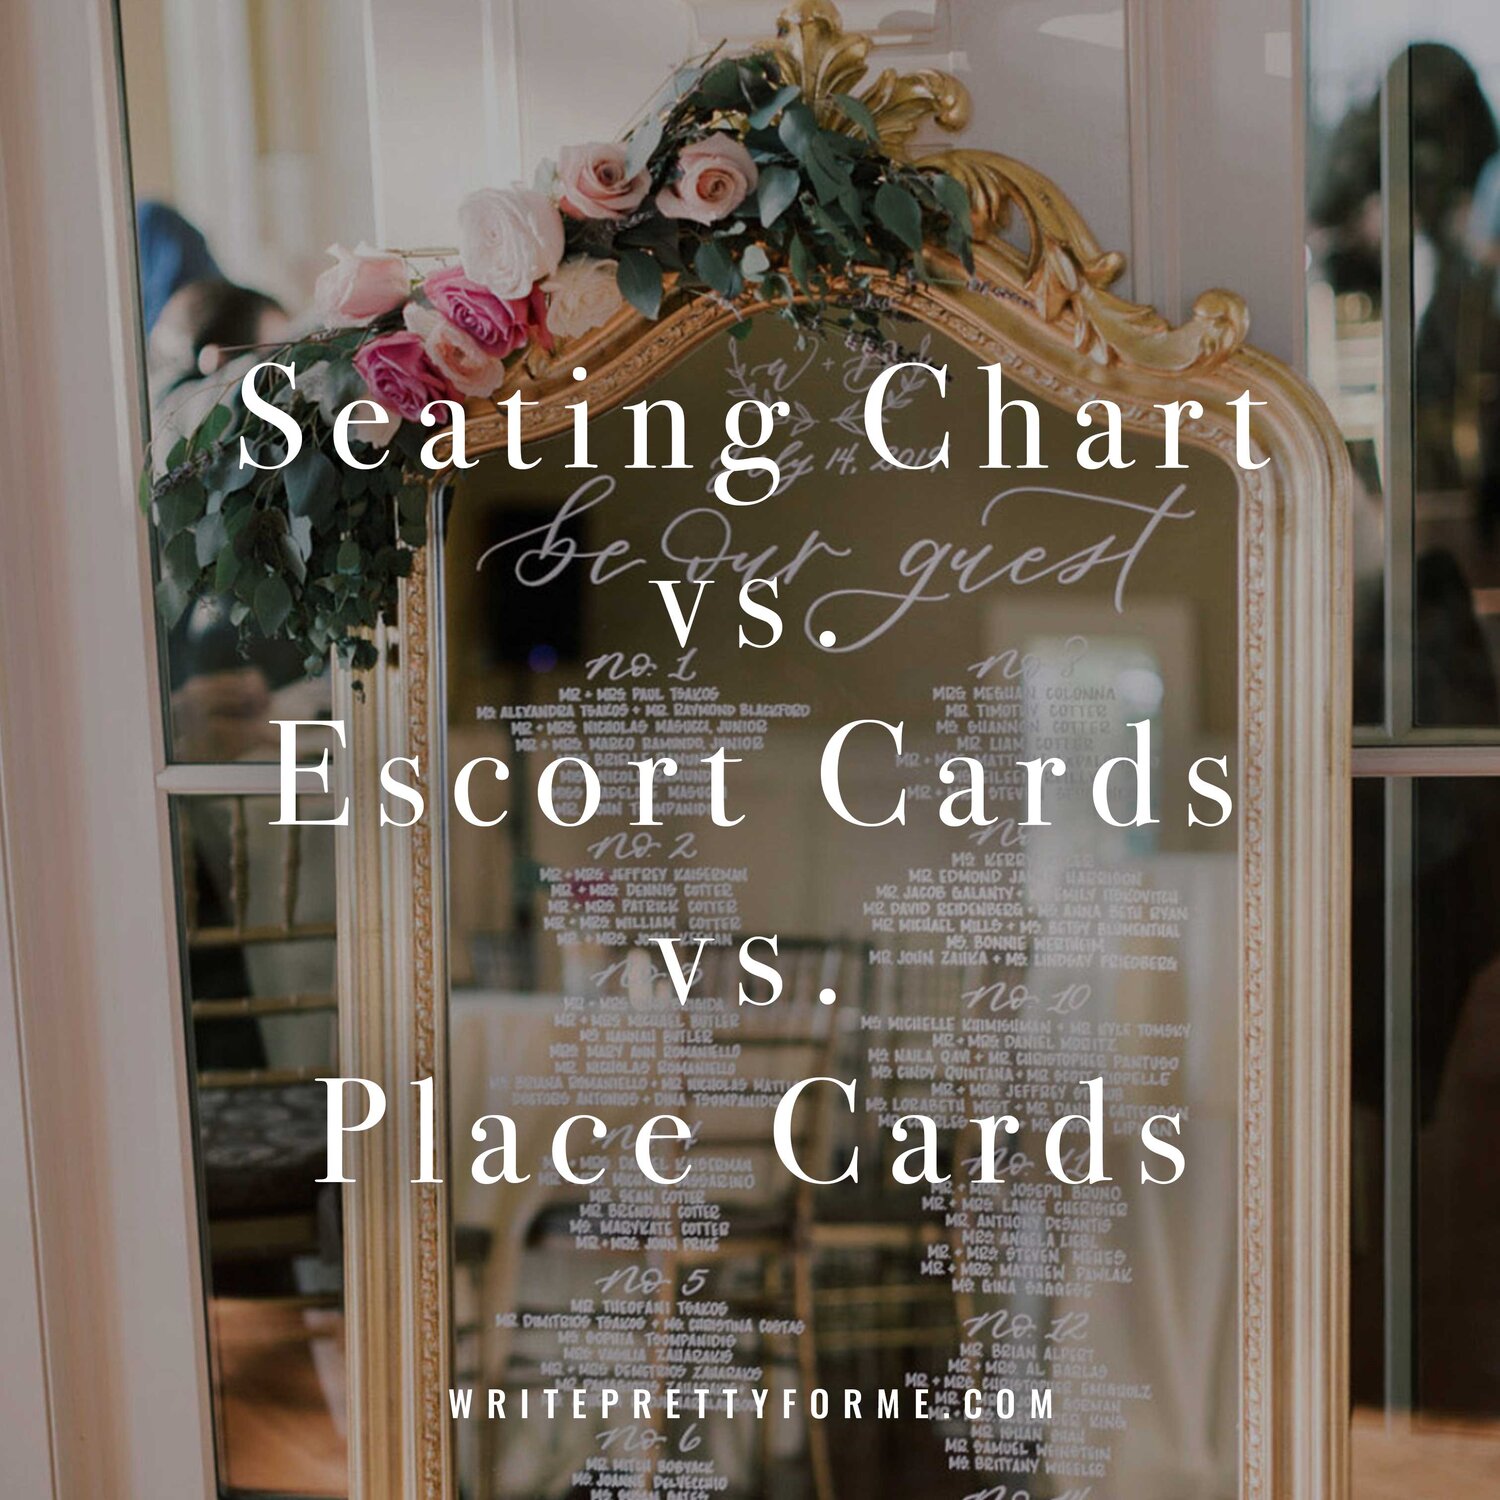 Seating Chart vs. Escort Cards vs. Place Cards — Hoboken New